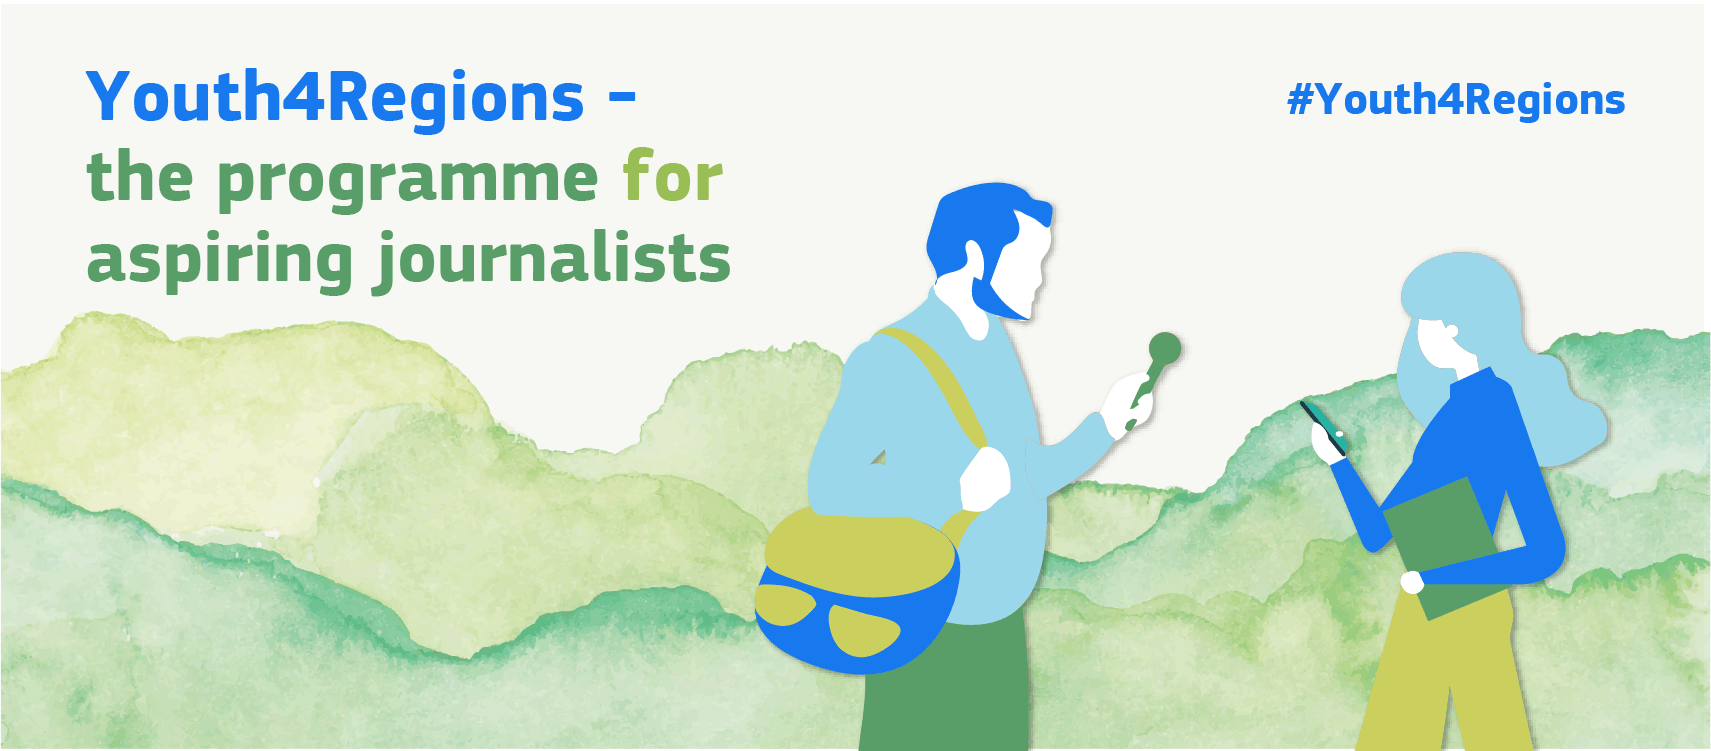 Training opportunity: journalism students and young journalists invited to apply